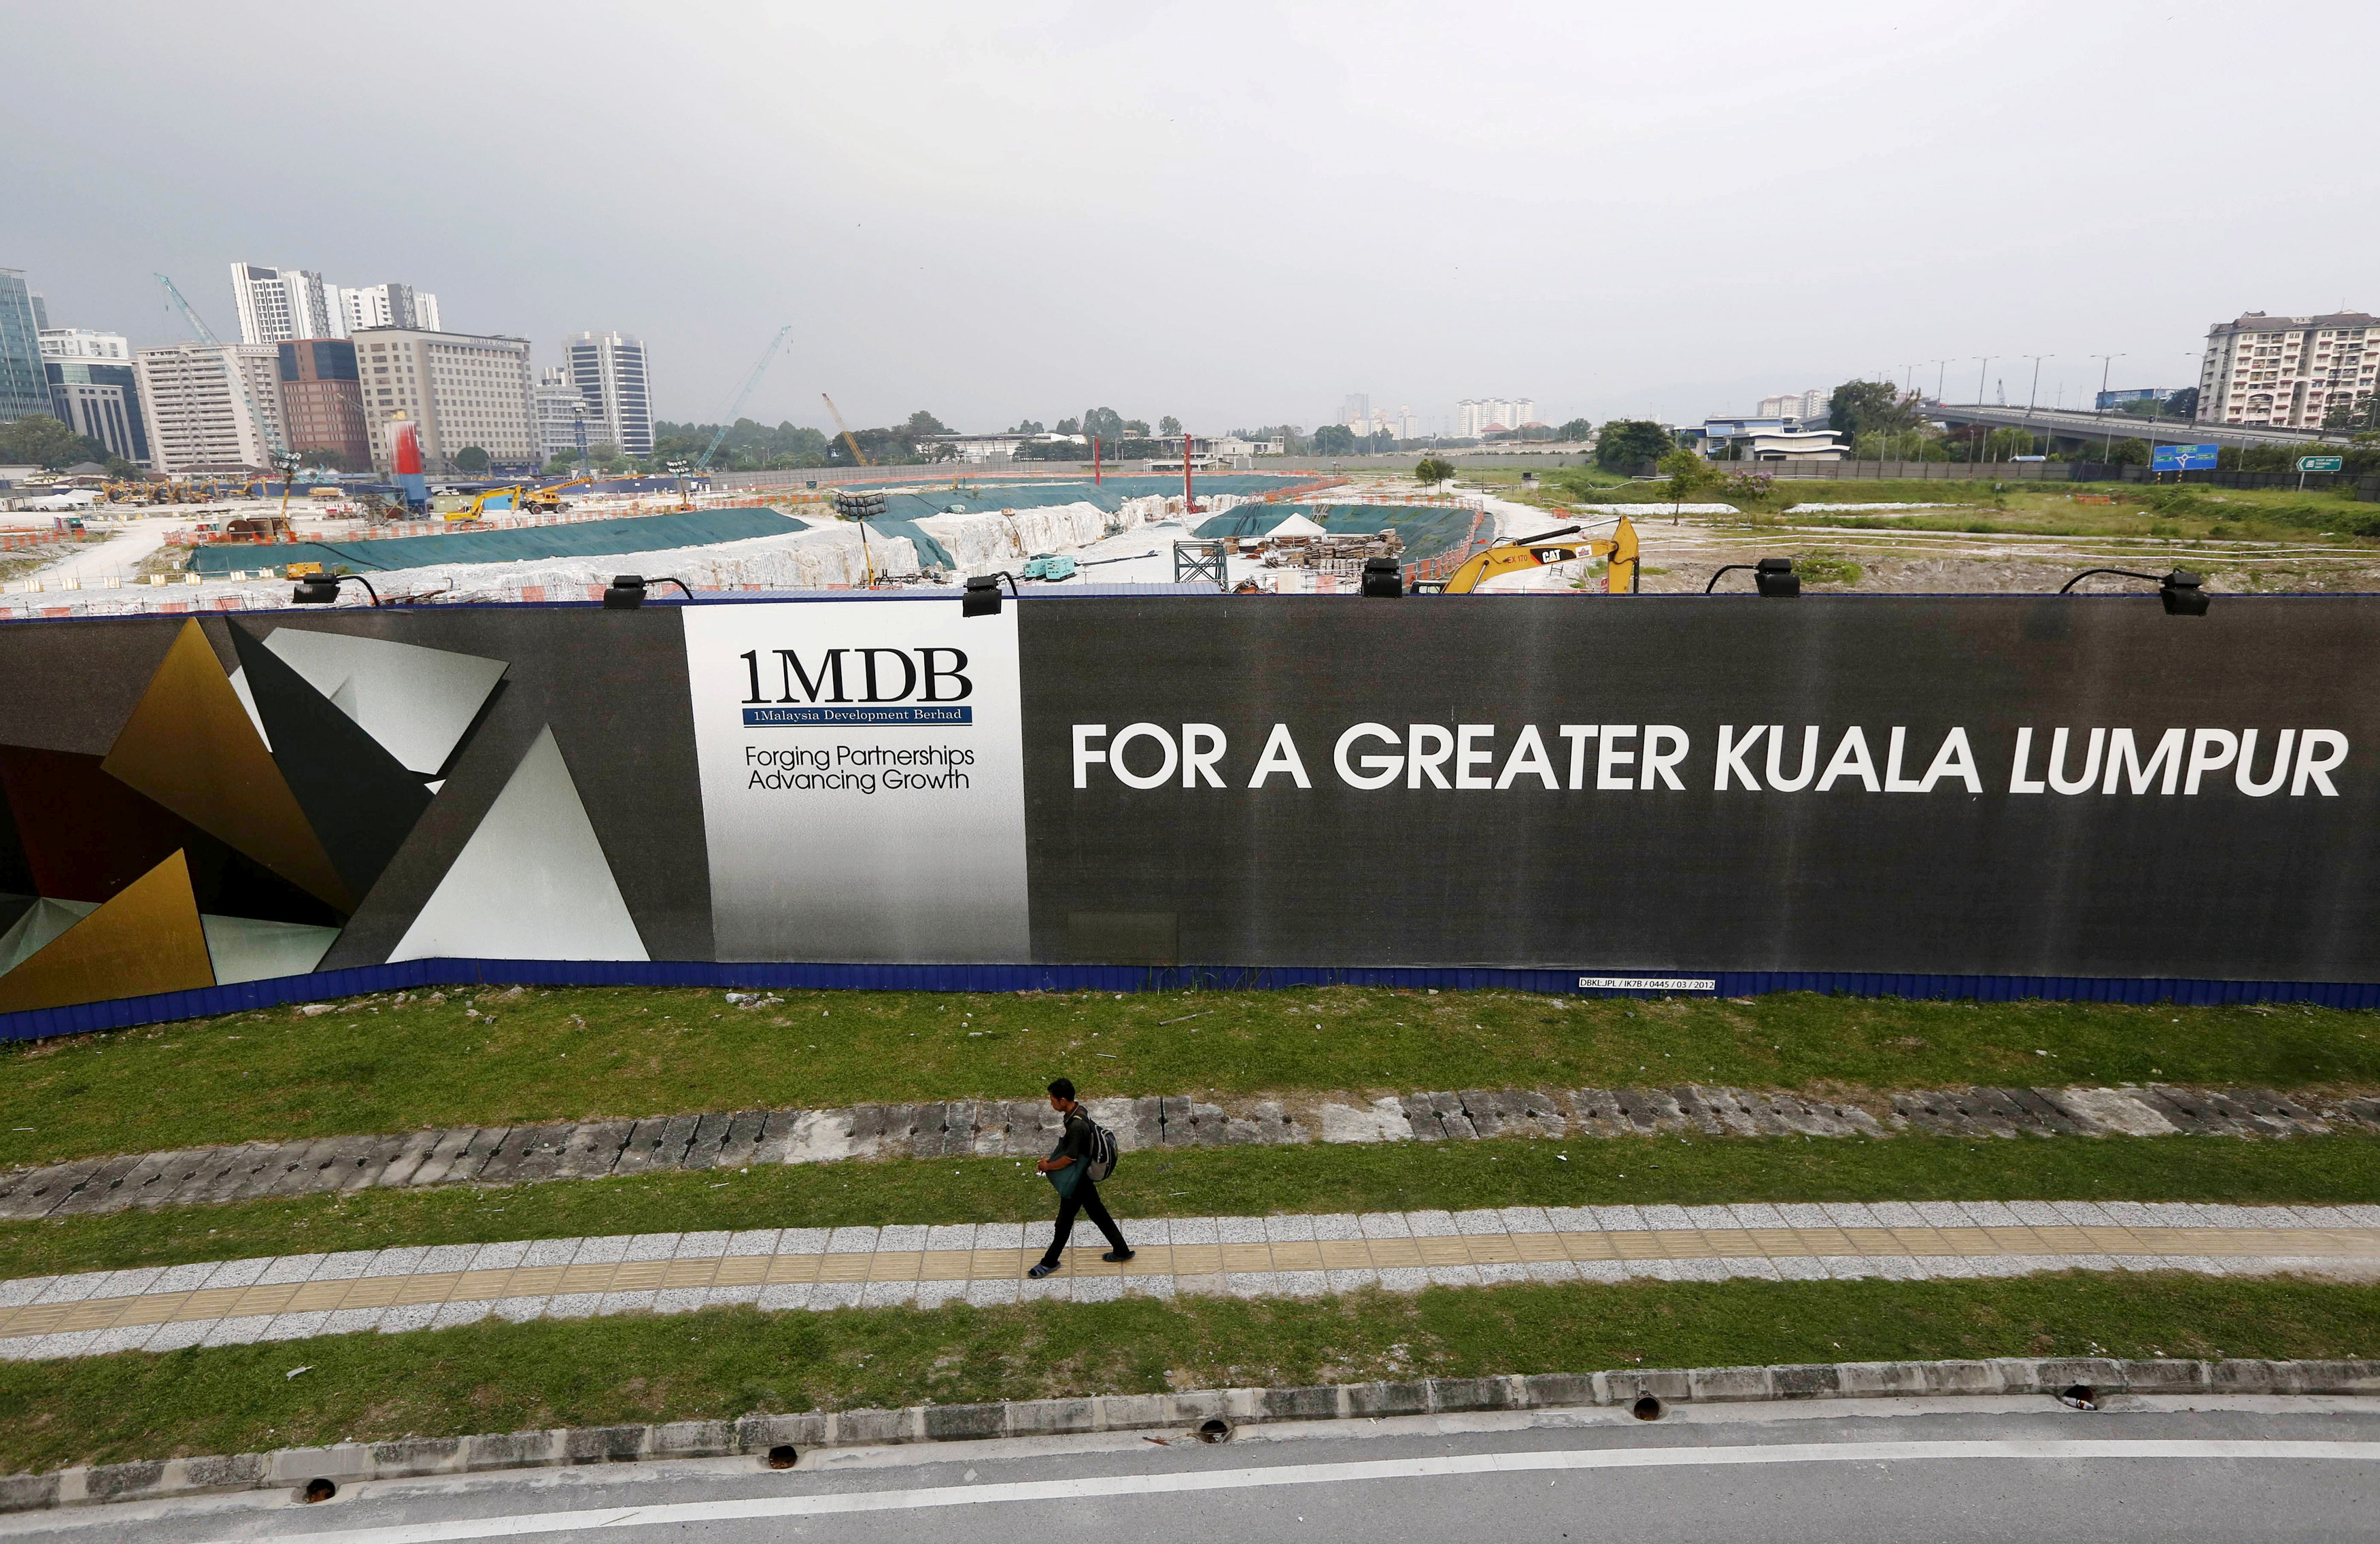 Evidence that Najib received 1MDB funds was ignored, say probe panelists